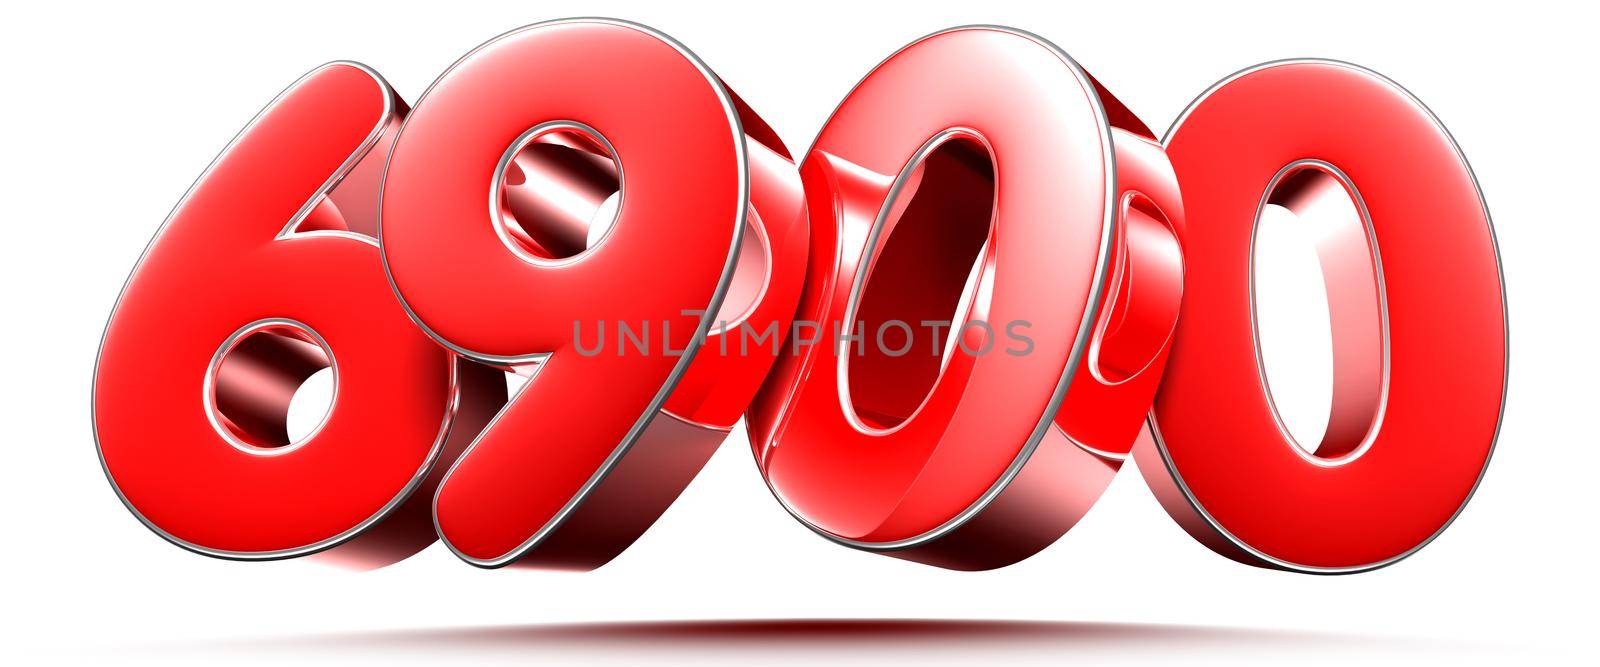 Rounded red numbers 6900 on white background 3D illustration with clipping path by thitimontoyai